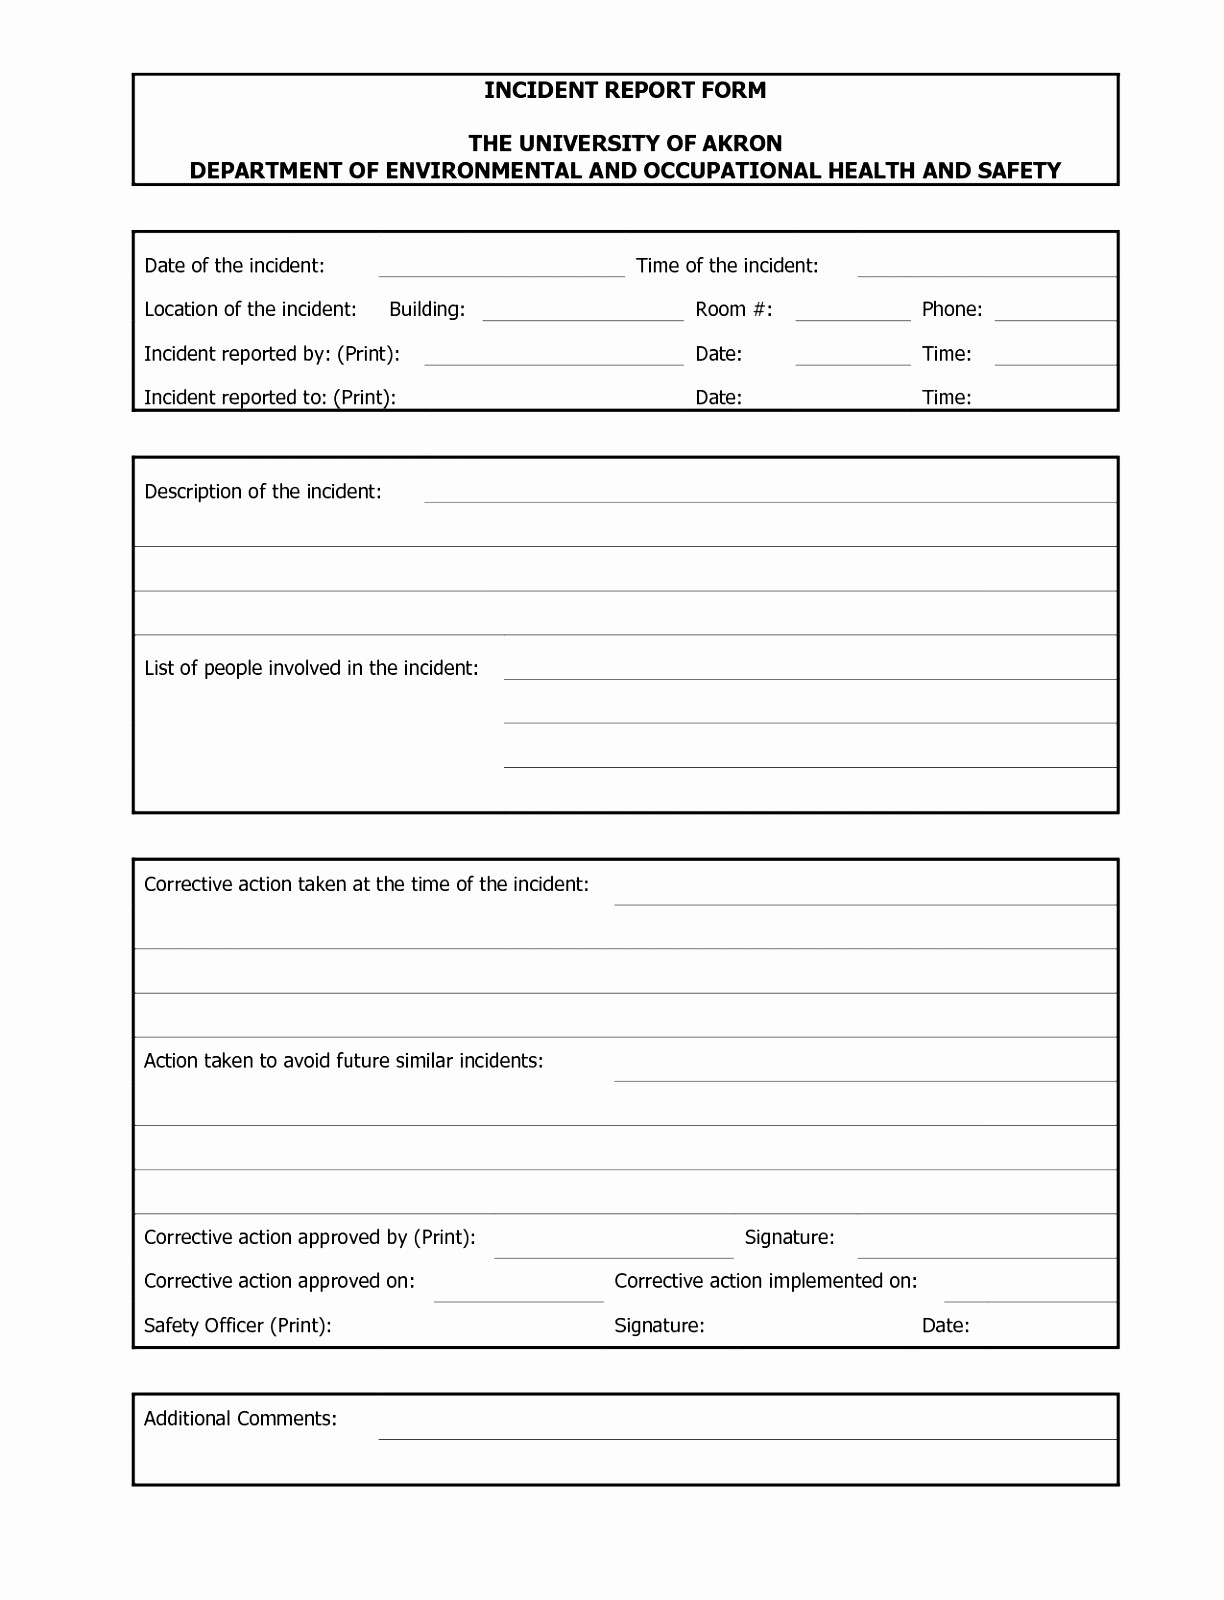 Automobile Accident Report Form Template Elegant Incident Pertaining To Health And Safety Incident Report Form Template